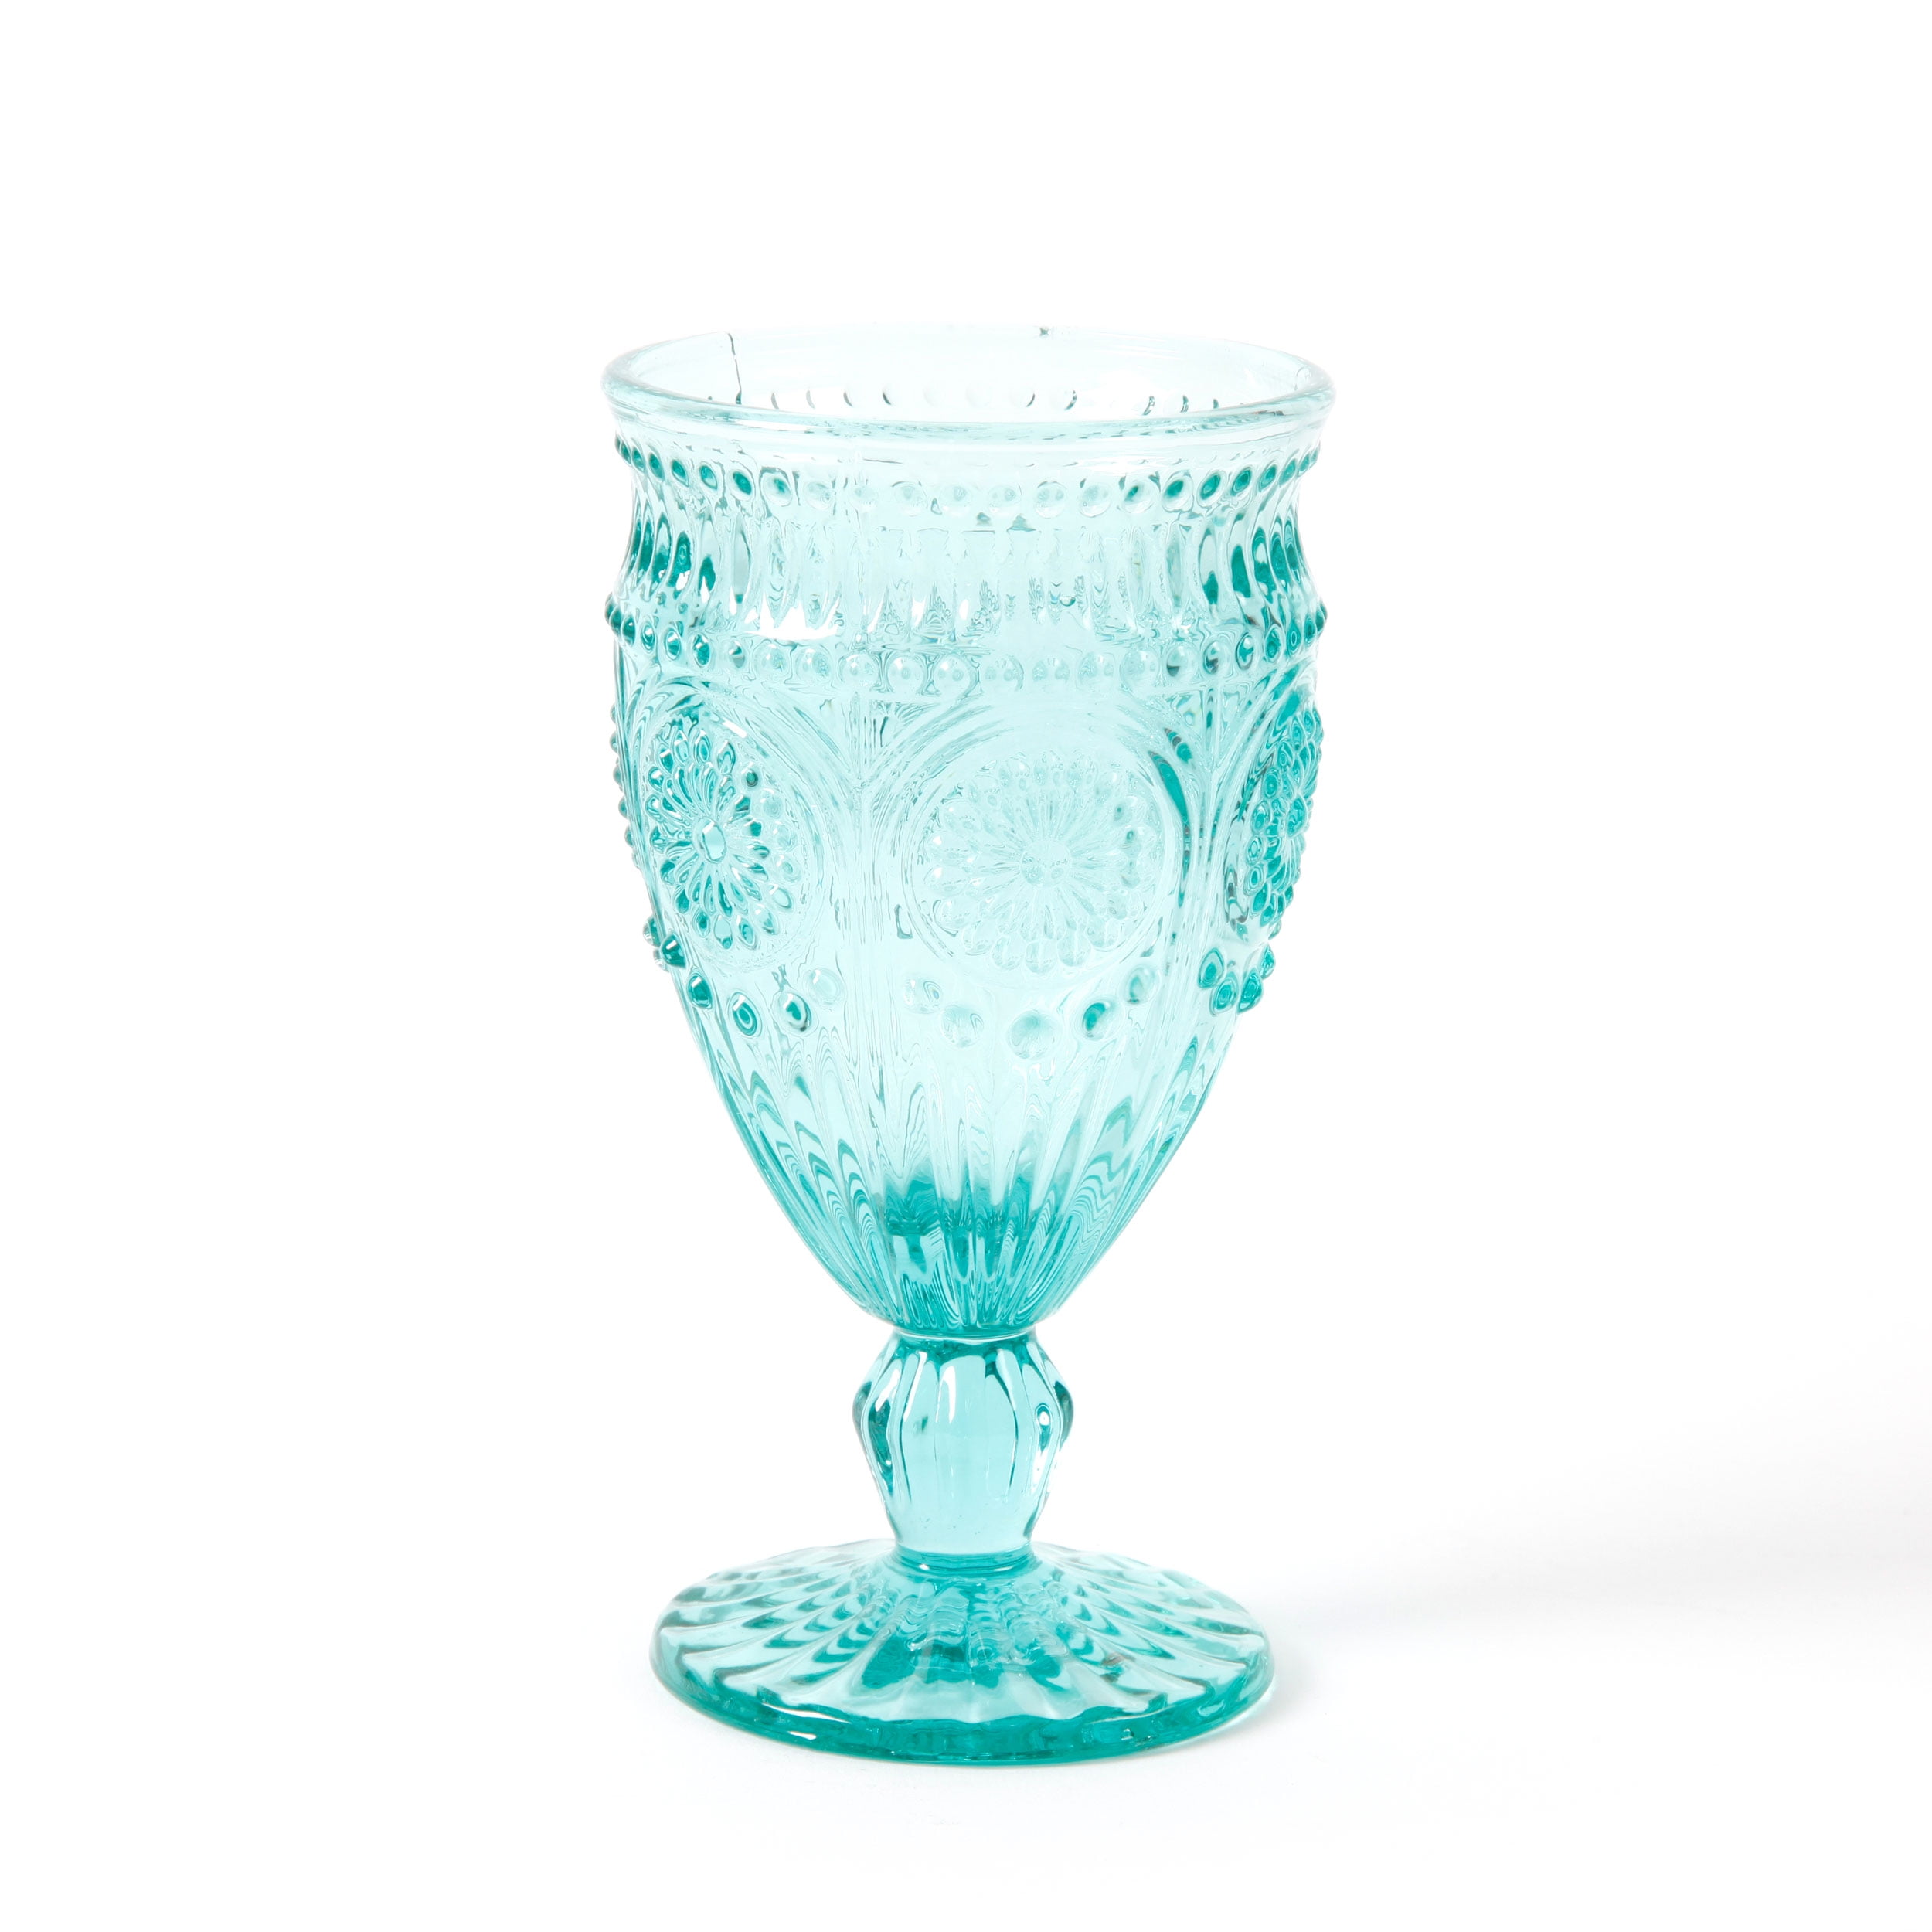 4 PIECE SET PIONEER WOMAN ADELINE 12 oz GOBLETS TURQUOISE 